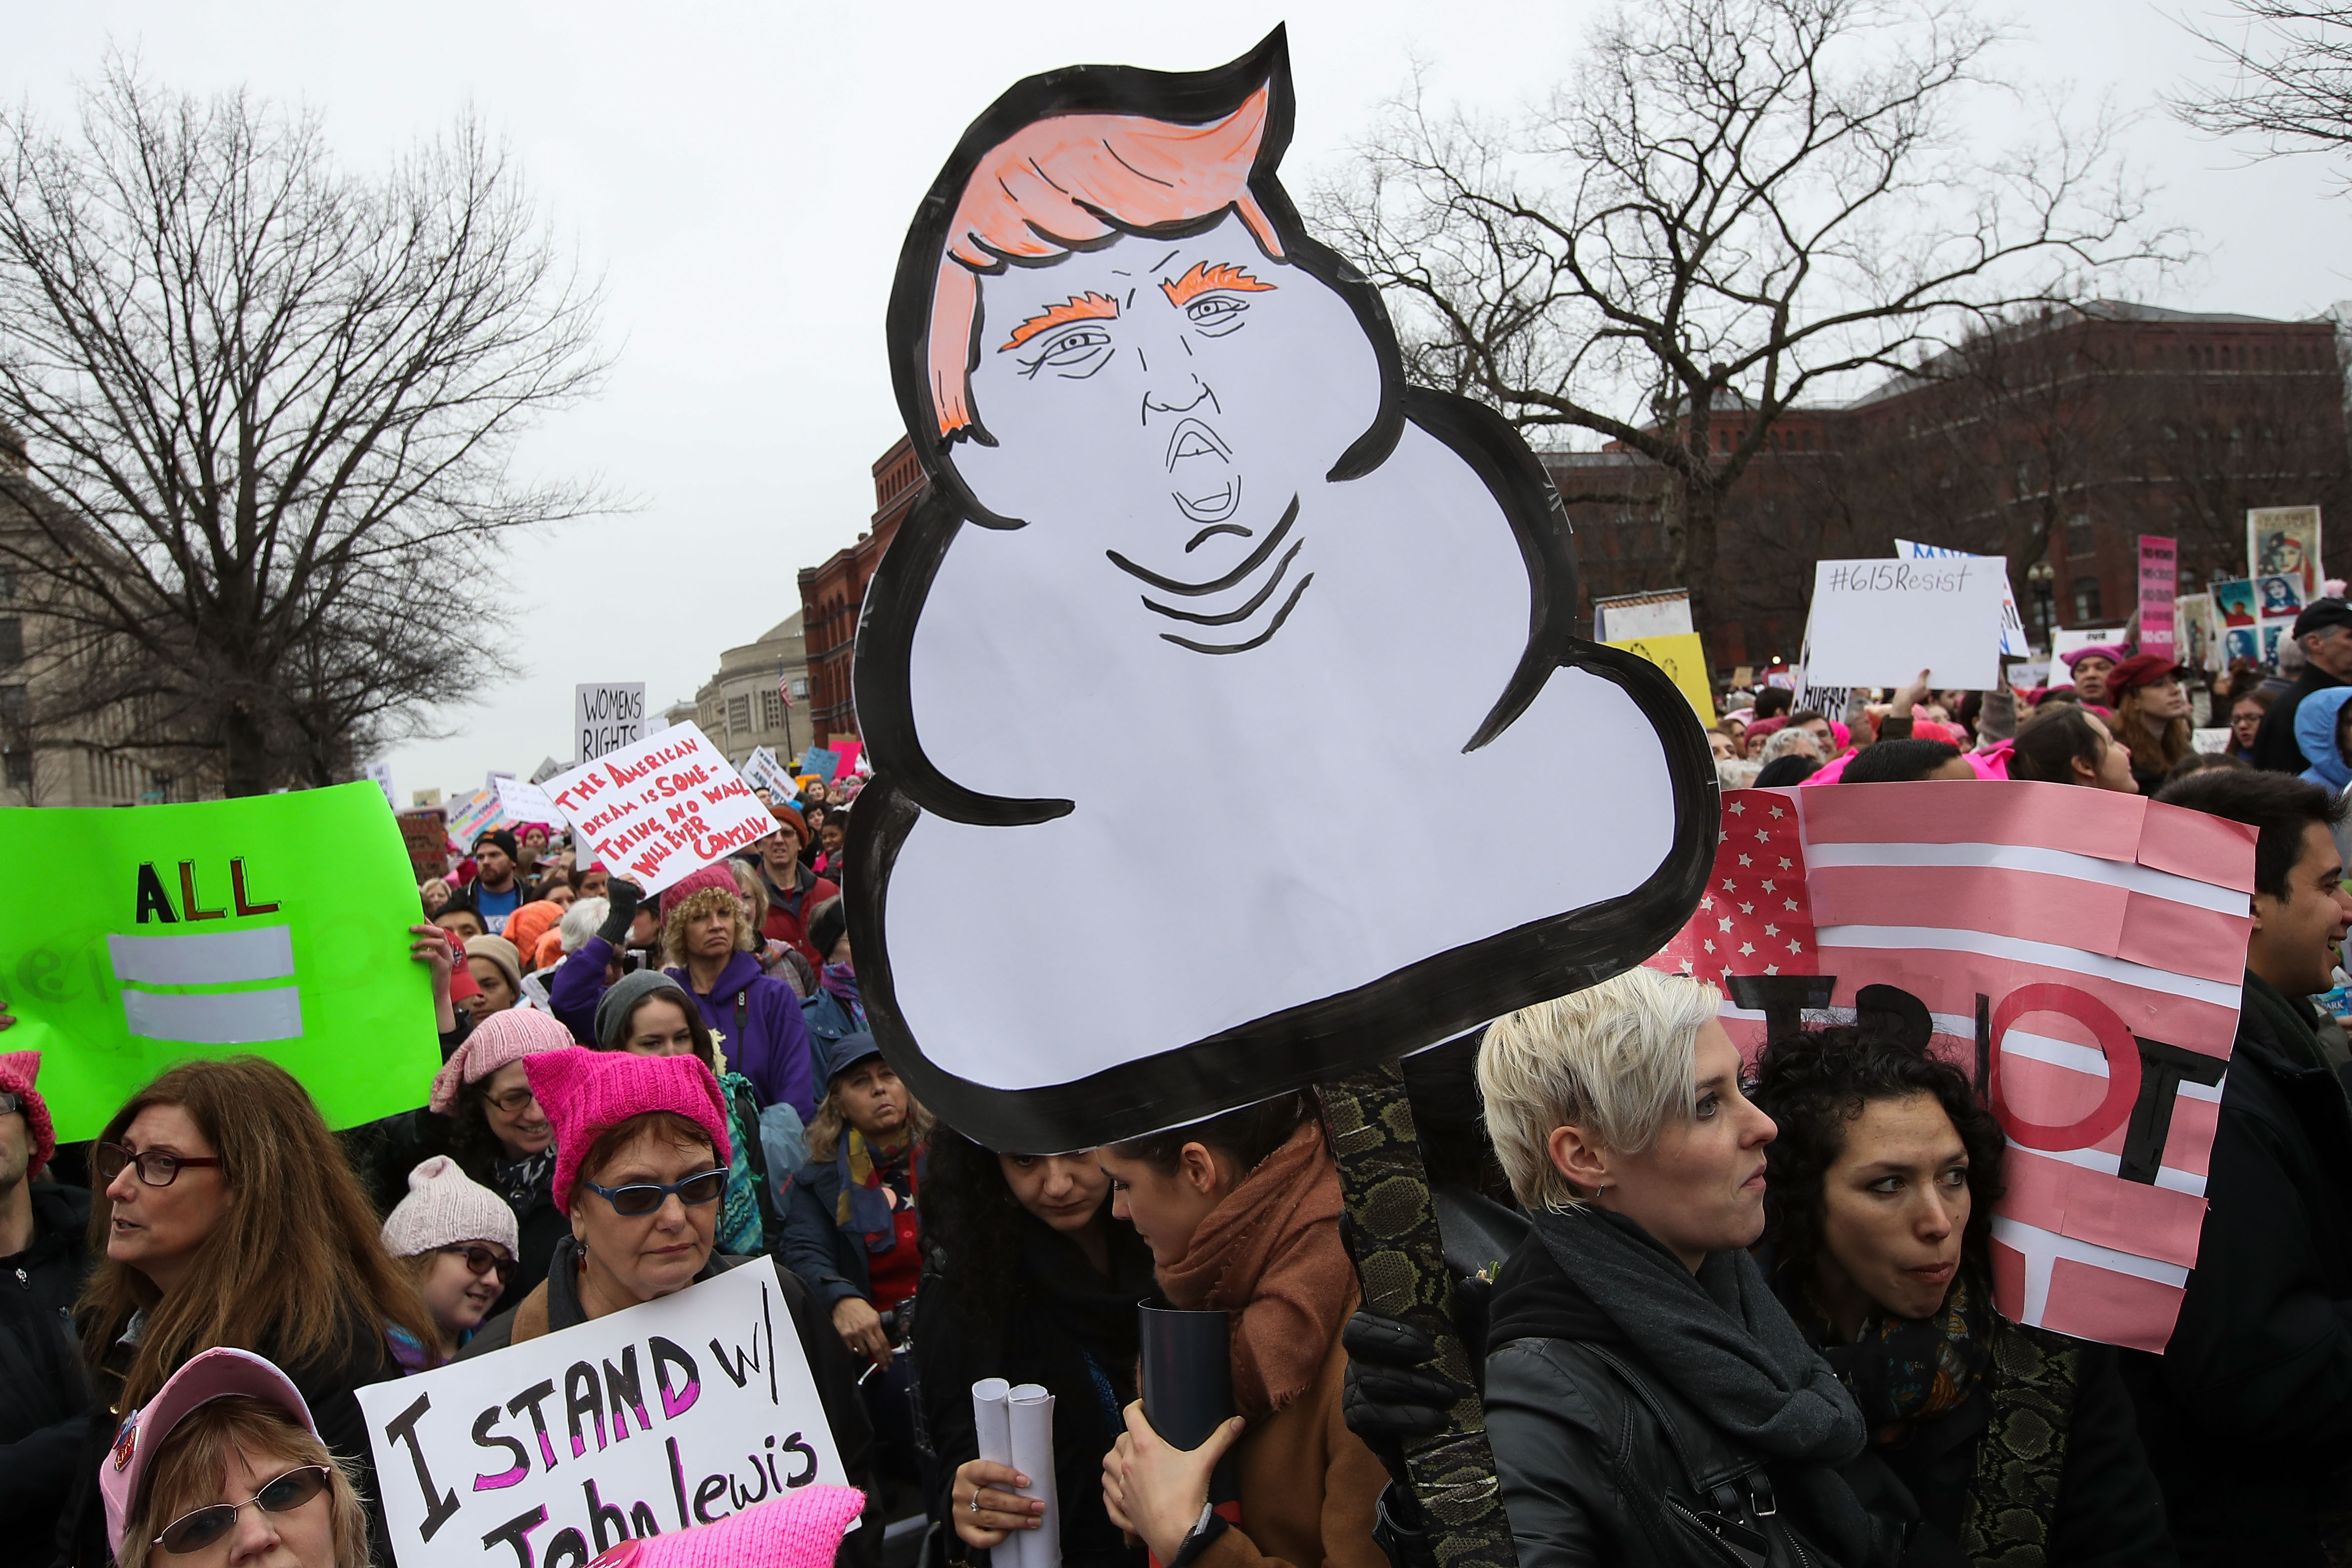 WASHINGTON, DC - JANUARY 21: Protesters march along 14th Street during the Women's March on Washington January 21, 2017 in Washington, DC. Large crowds are attending the anti-Trump rally a day after U.S. President Donald Trump was sworn in as the 45th U.S. president. (Photo by Drew Angerer/Getty Images)